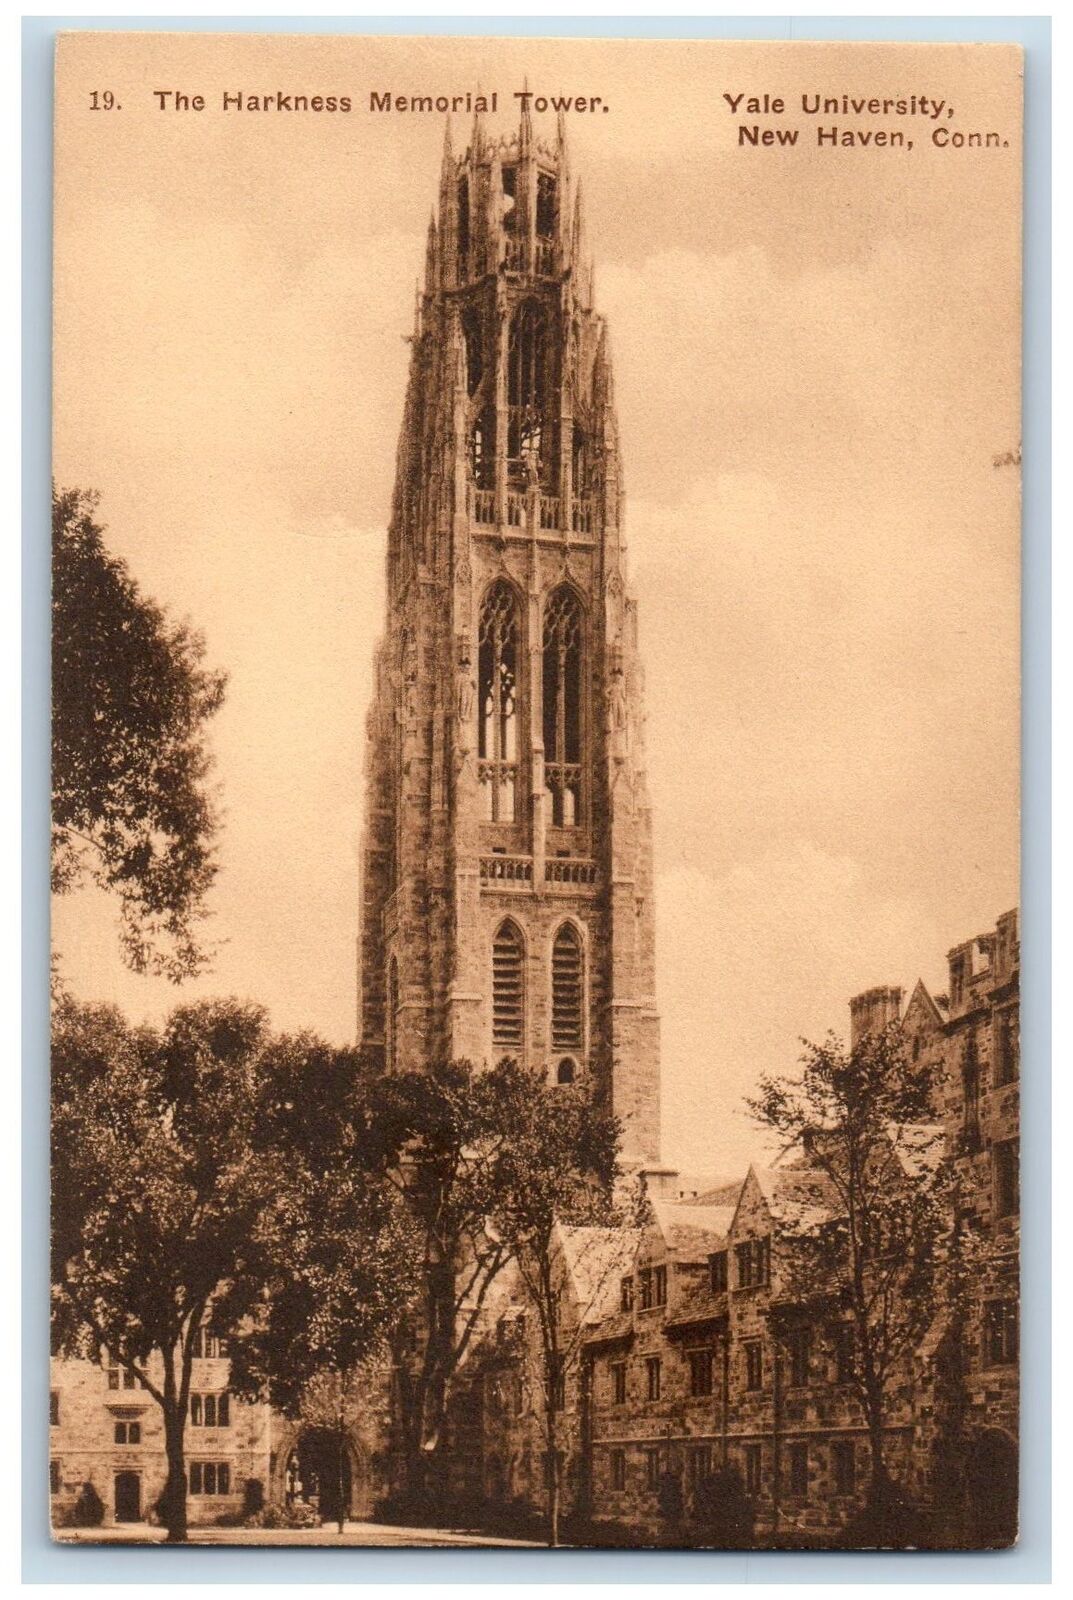 c1910's Yale University Harkness Memorial Tower New Haven Connecticut Postcard